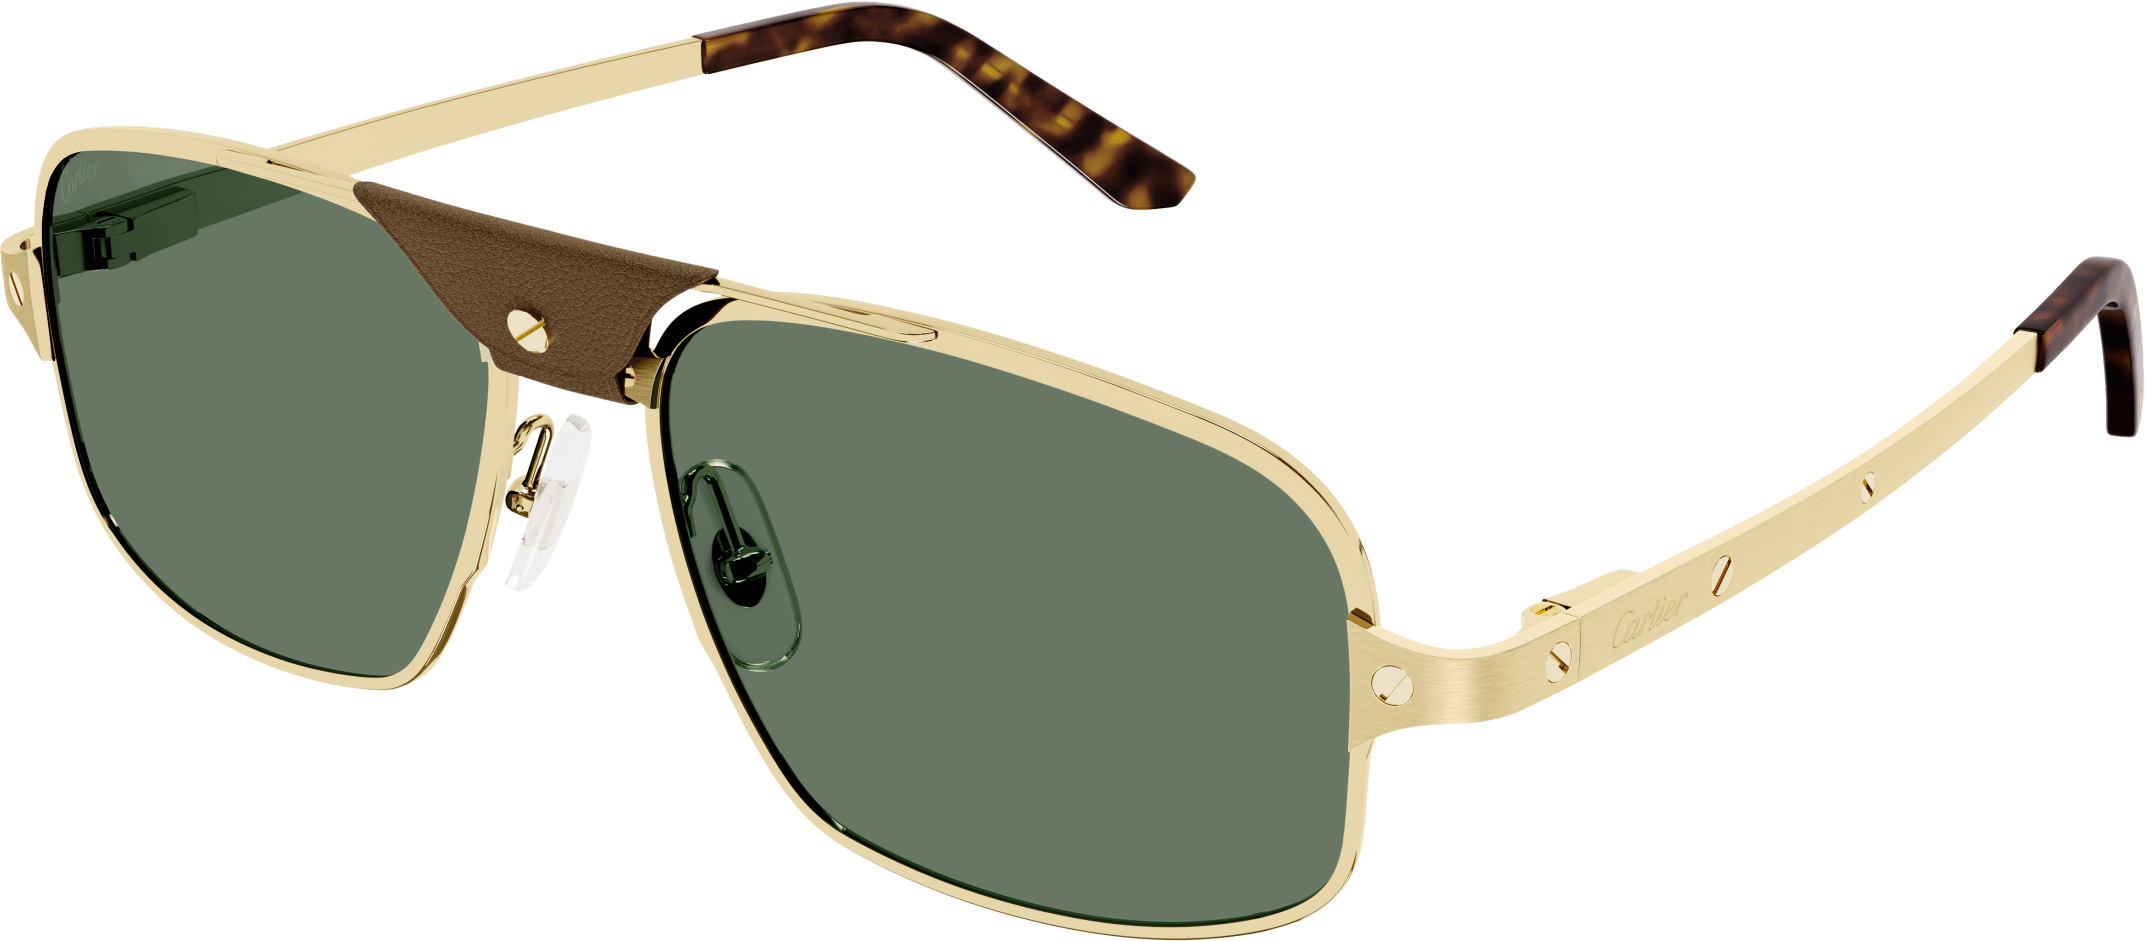 Color_CT0295S-002 - GOLD - GREEN - AR (ANTI REFLECTIVE) - POLARIZED